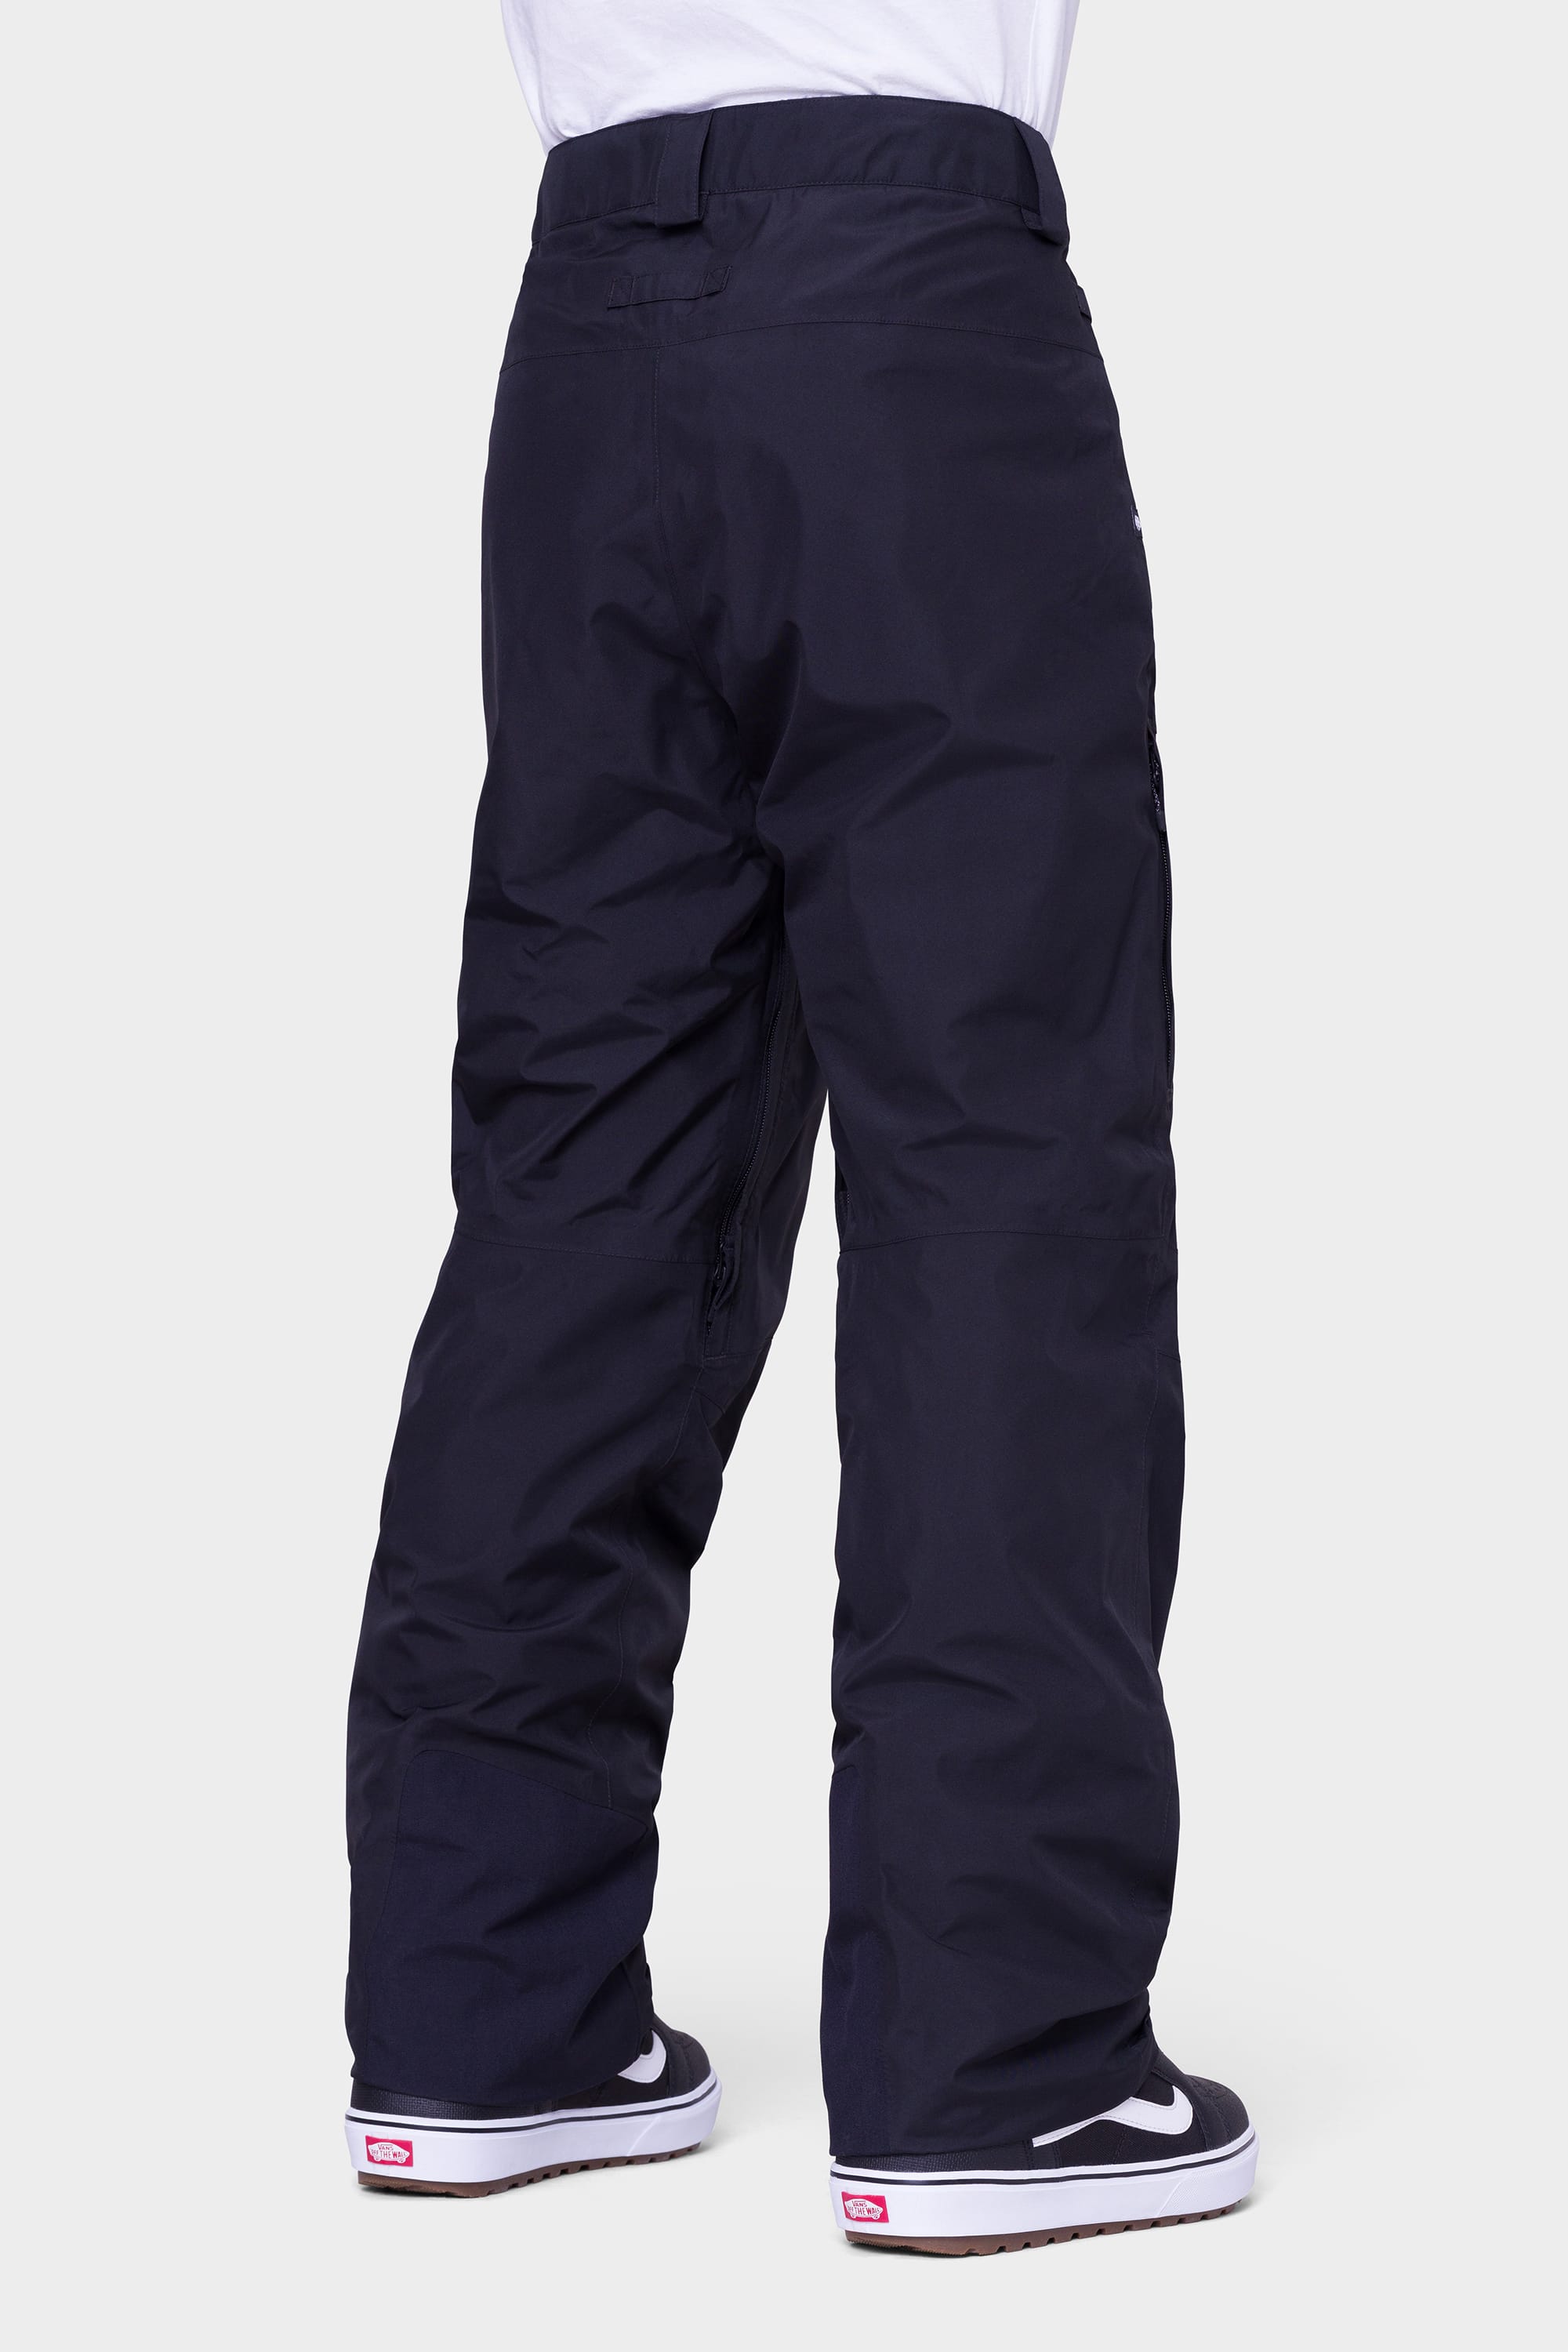 WinterProof™ Thermal Pants for Men and Women: Where Warmth Meets